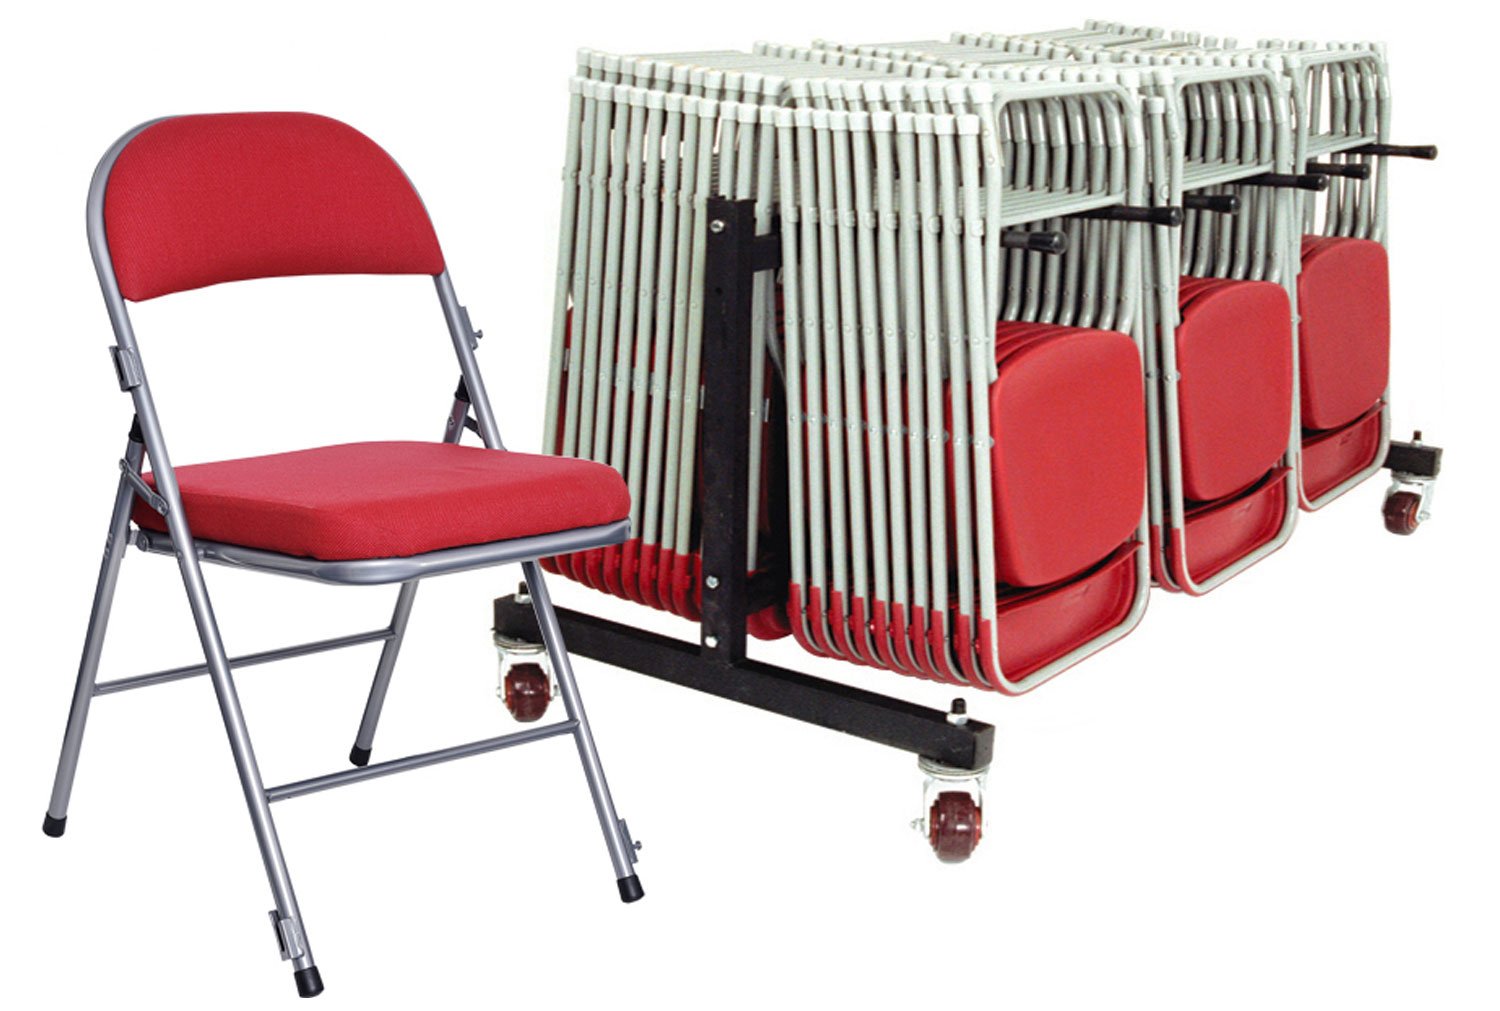 Deluxe Folding Office Chair Bundle Deal (30 Office Chairs & 1 Trolley), Red